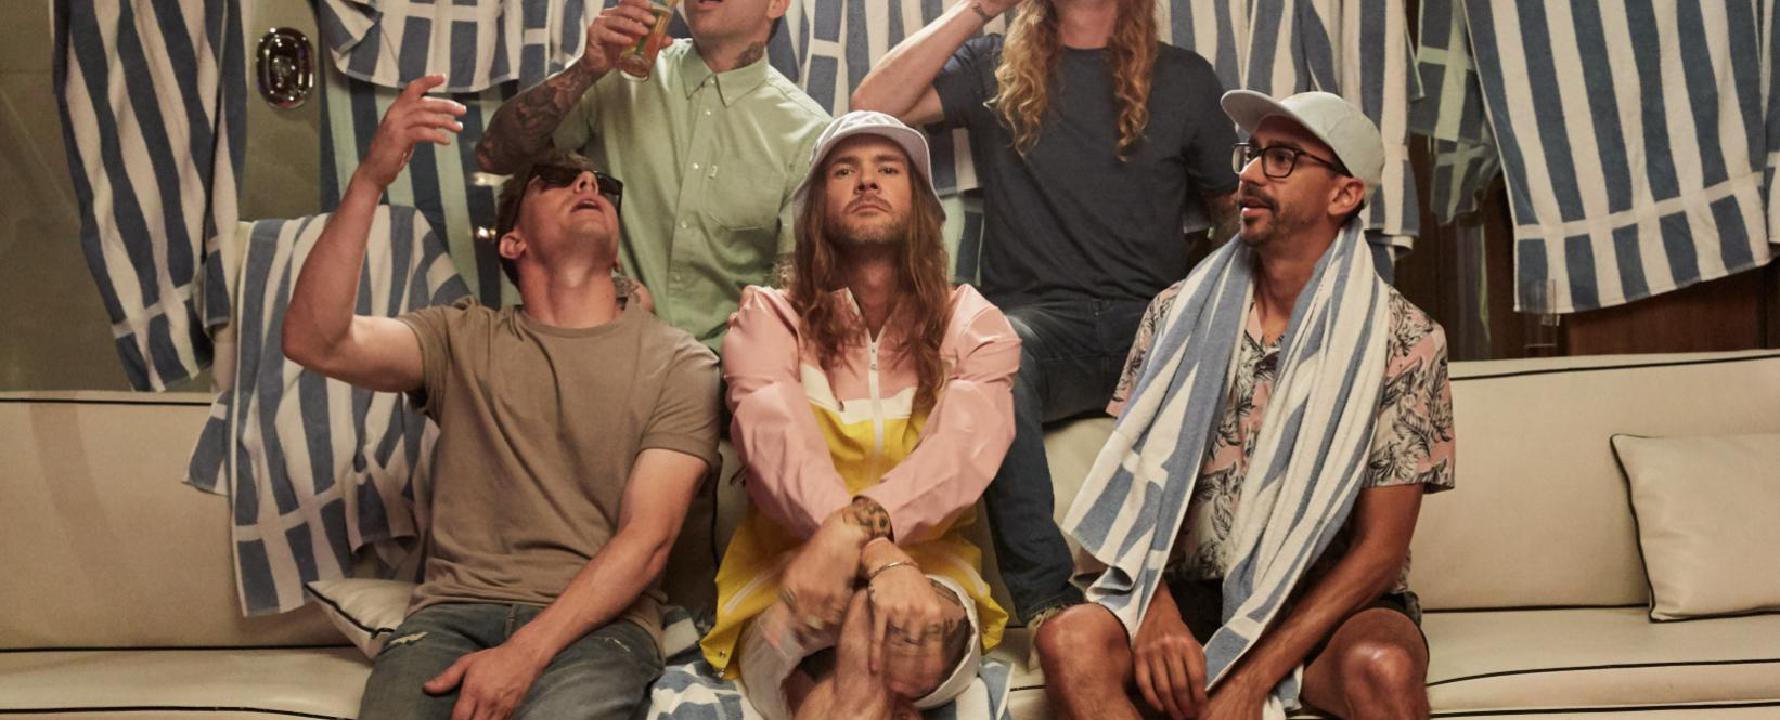 Promotional photograph of Dirty Heads.